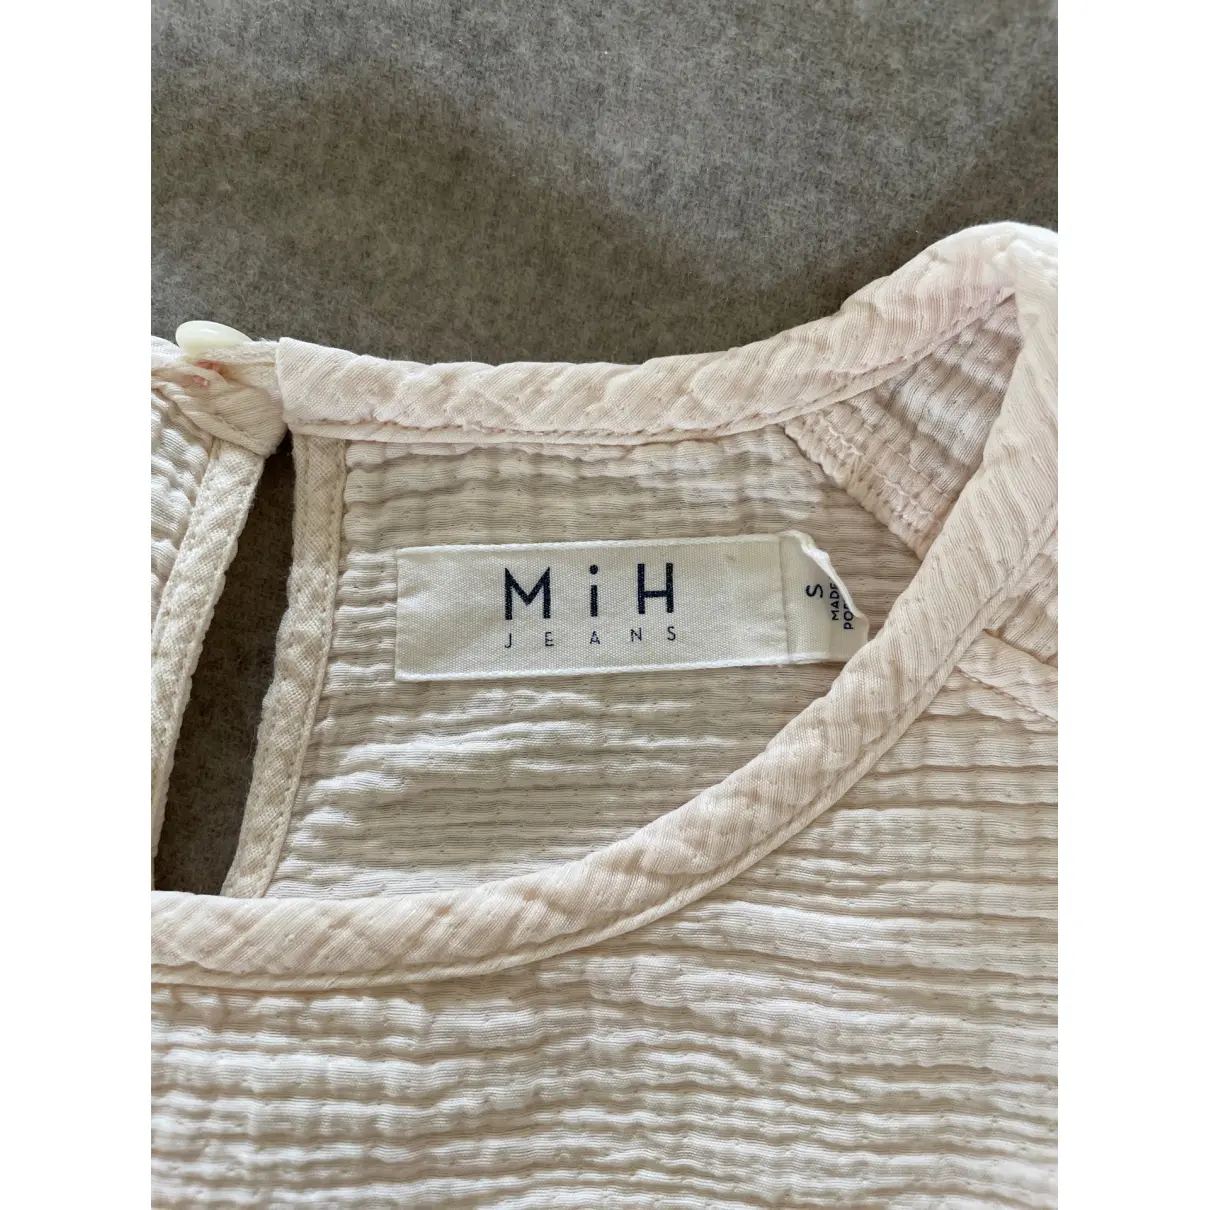 Buy Mih Jeans Blouse online